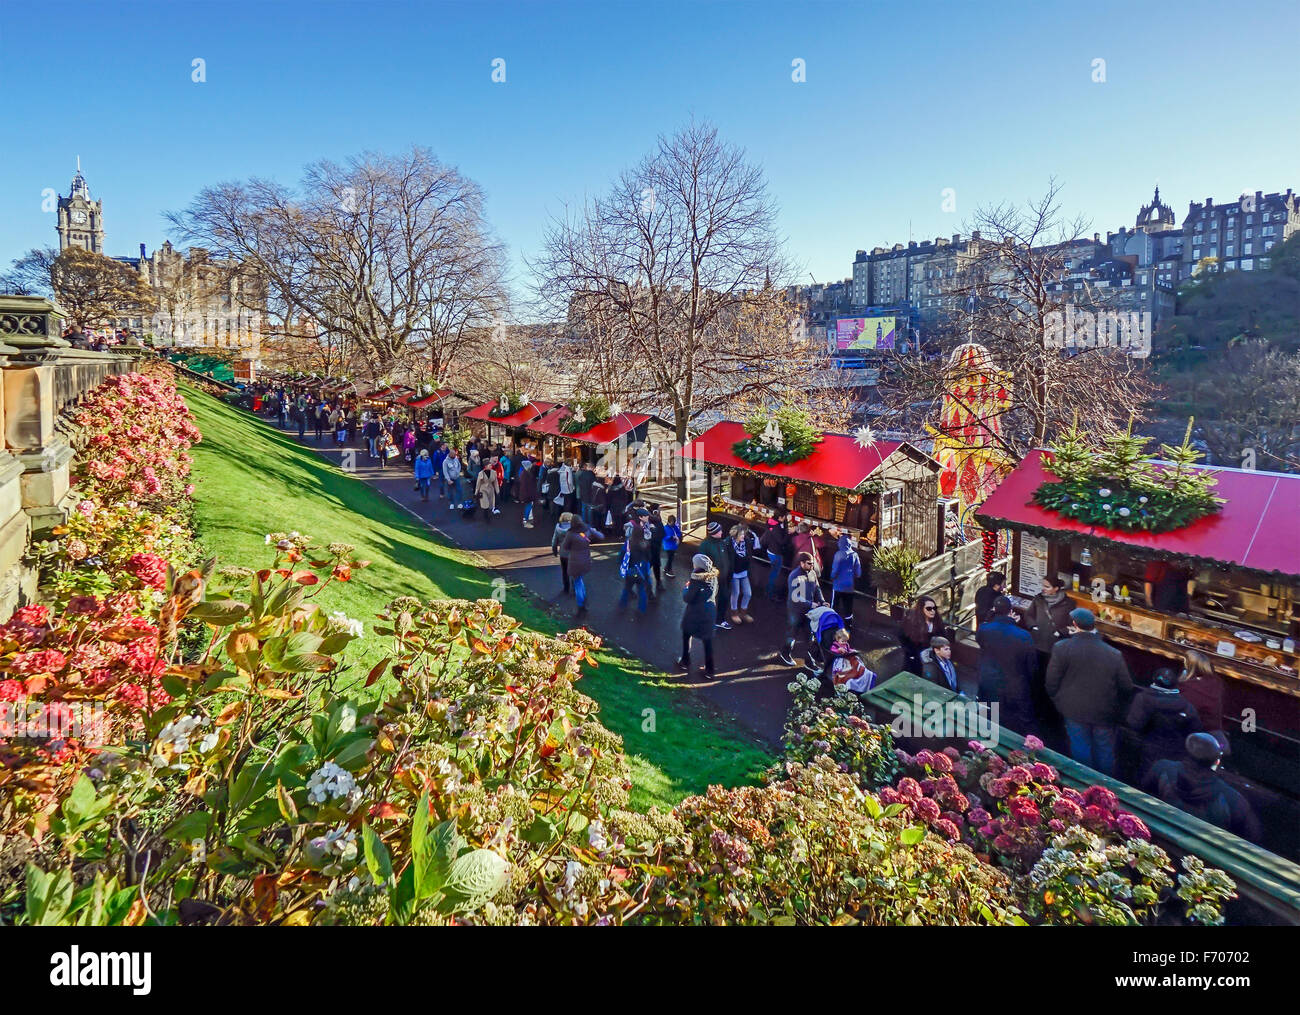 Edinburgh Christmas market 2015 in East Princes Gardens Edinburgh with stalls selling goods and food & drink Stock Photo